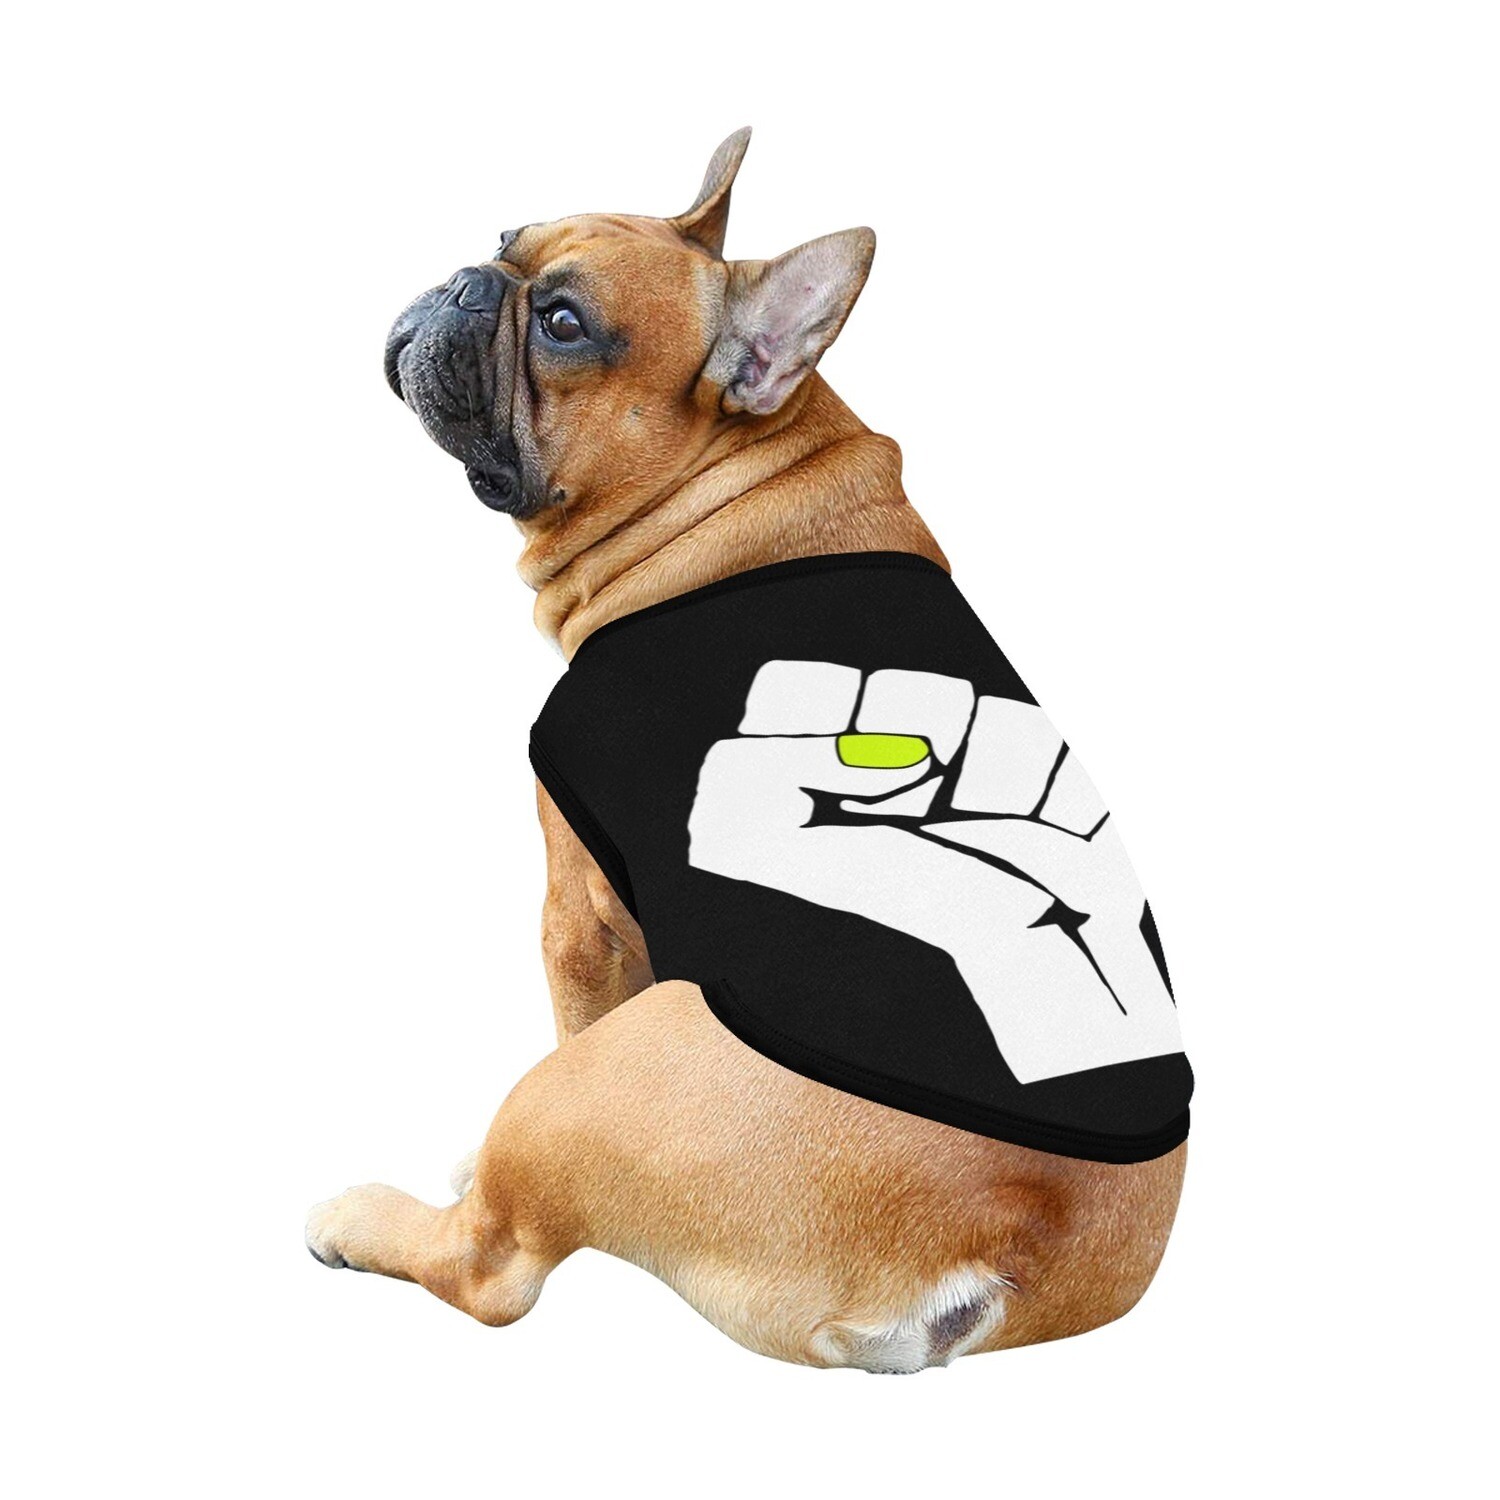 🐕 ✊🏽 Power fist neon nails dog shirt, dog tank top, dog t-shirt, dog clothes, Gift, 7 sizes XS to 3XL, get loud, empowerment, raised fist